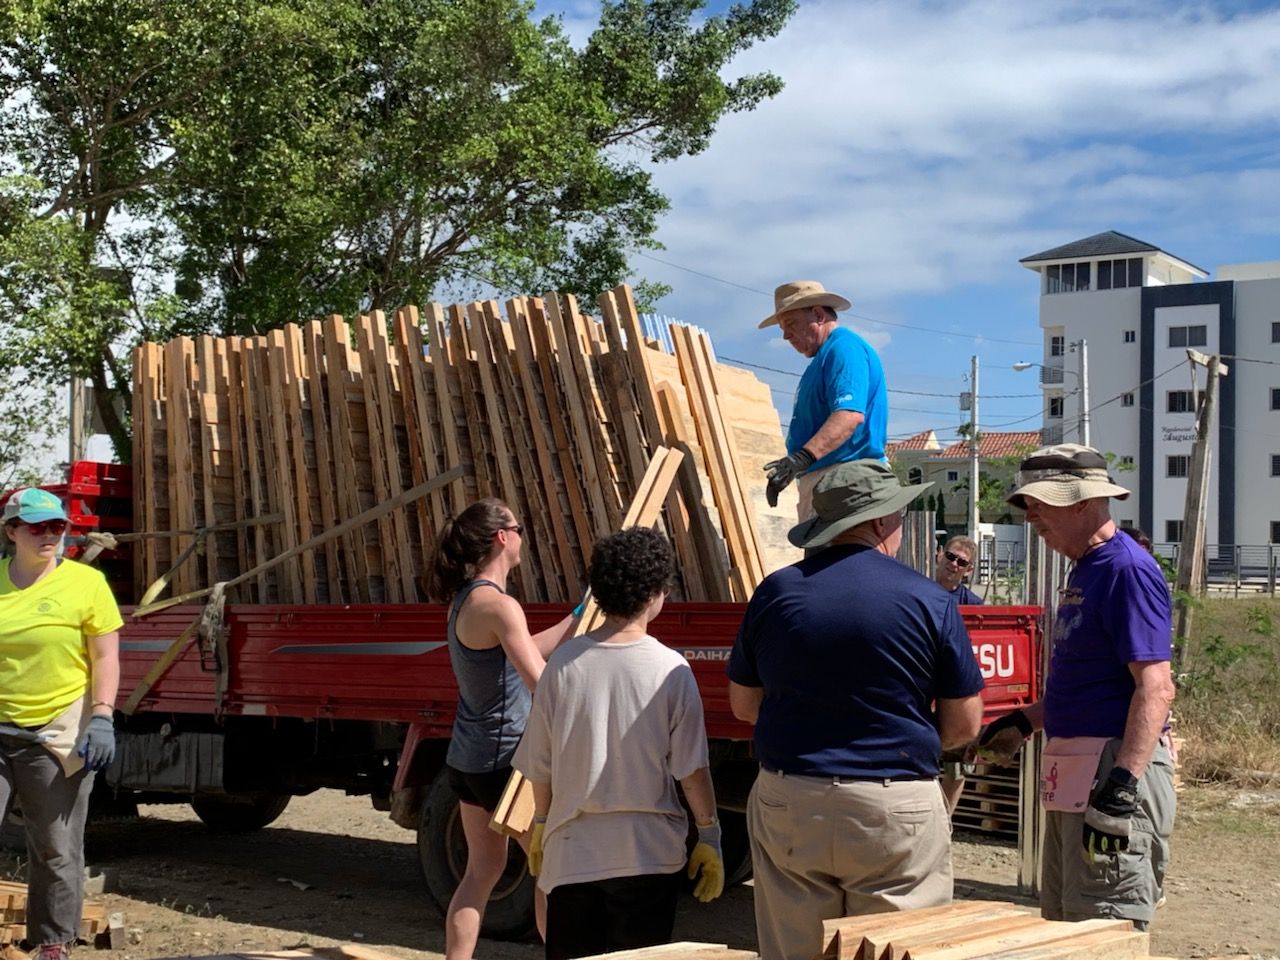 Loading latrine materials in a truck to be transported to the job site to be built. 2019